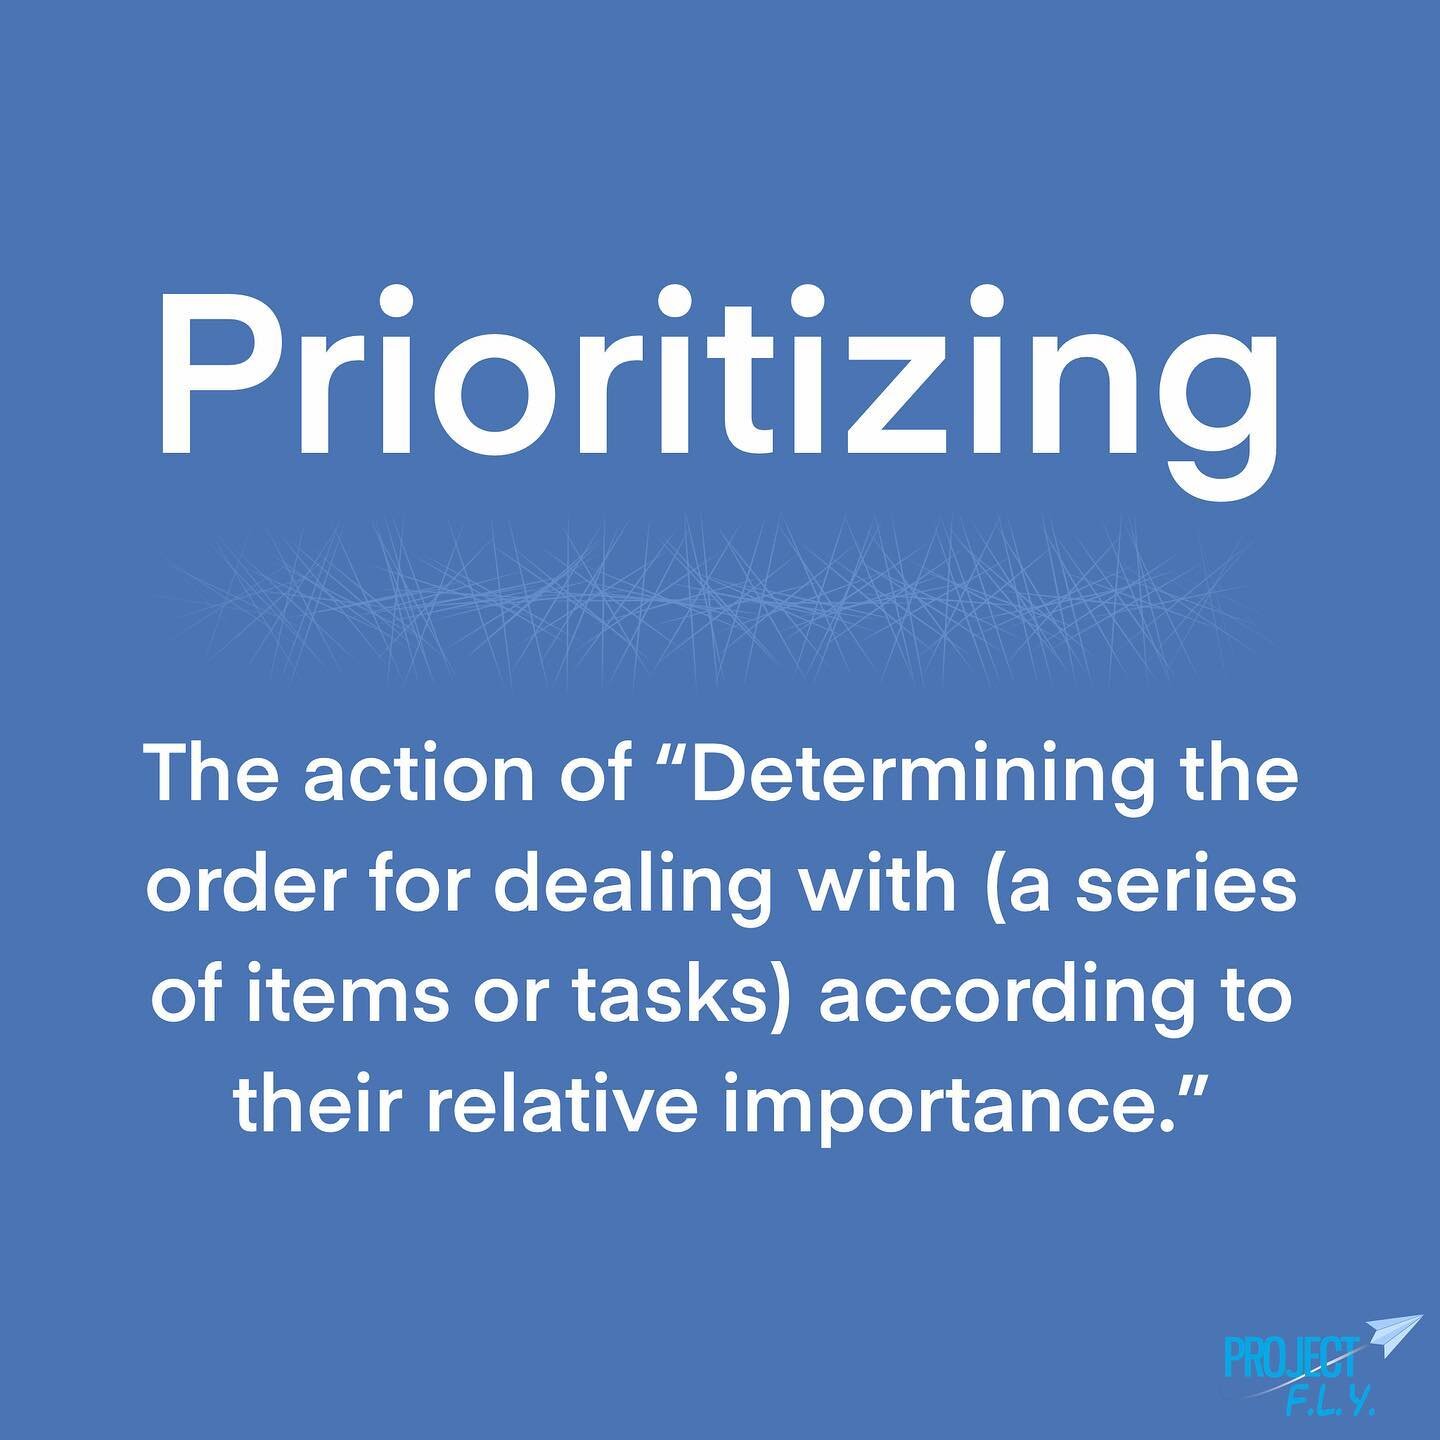 Prioritizing is a very important factor in time management. When prioritizing your to-do list, it is very important to plan in such a way that you can complete your tasks effectively and efficiently.

#priorities #timemanagement #priority #leadership